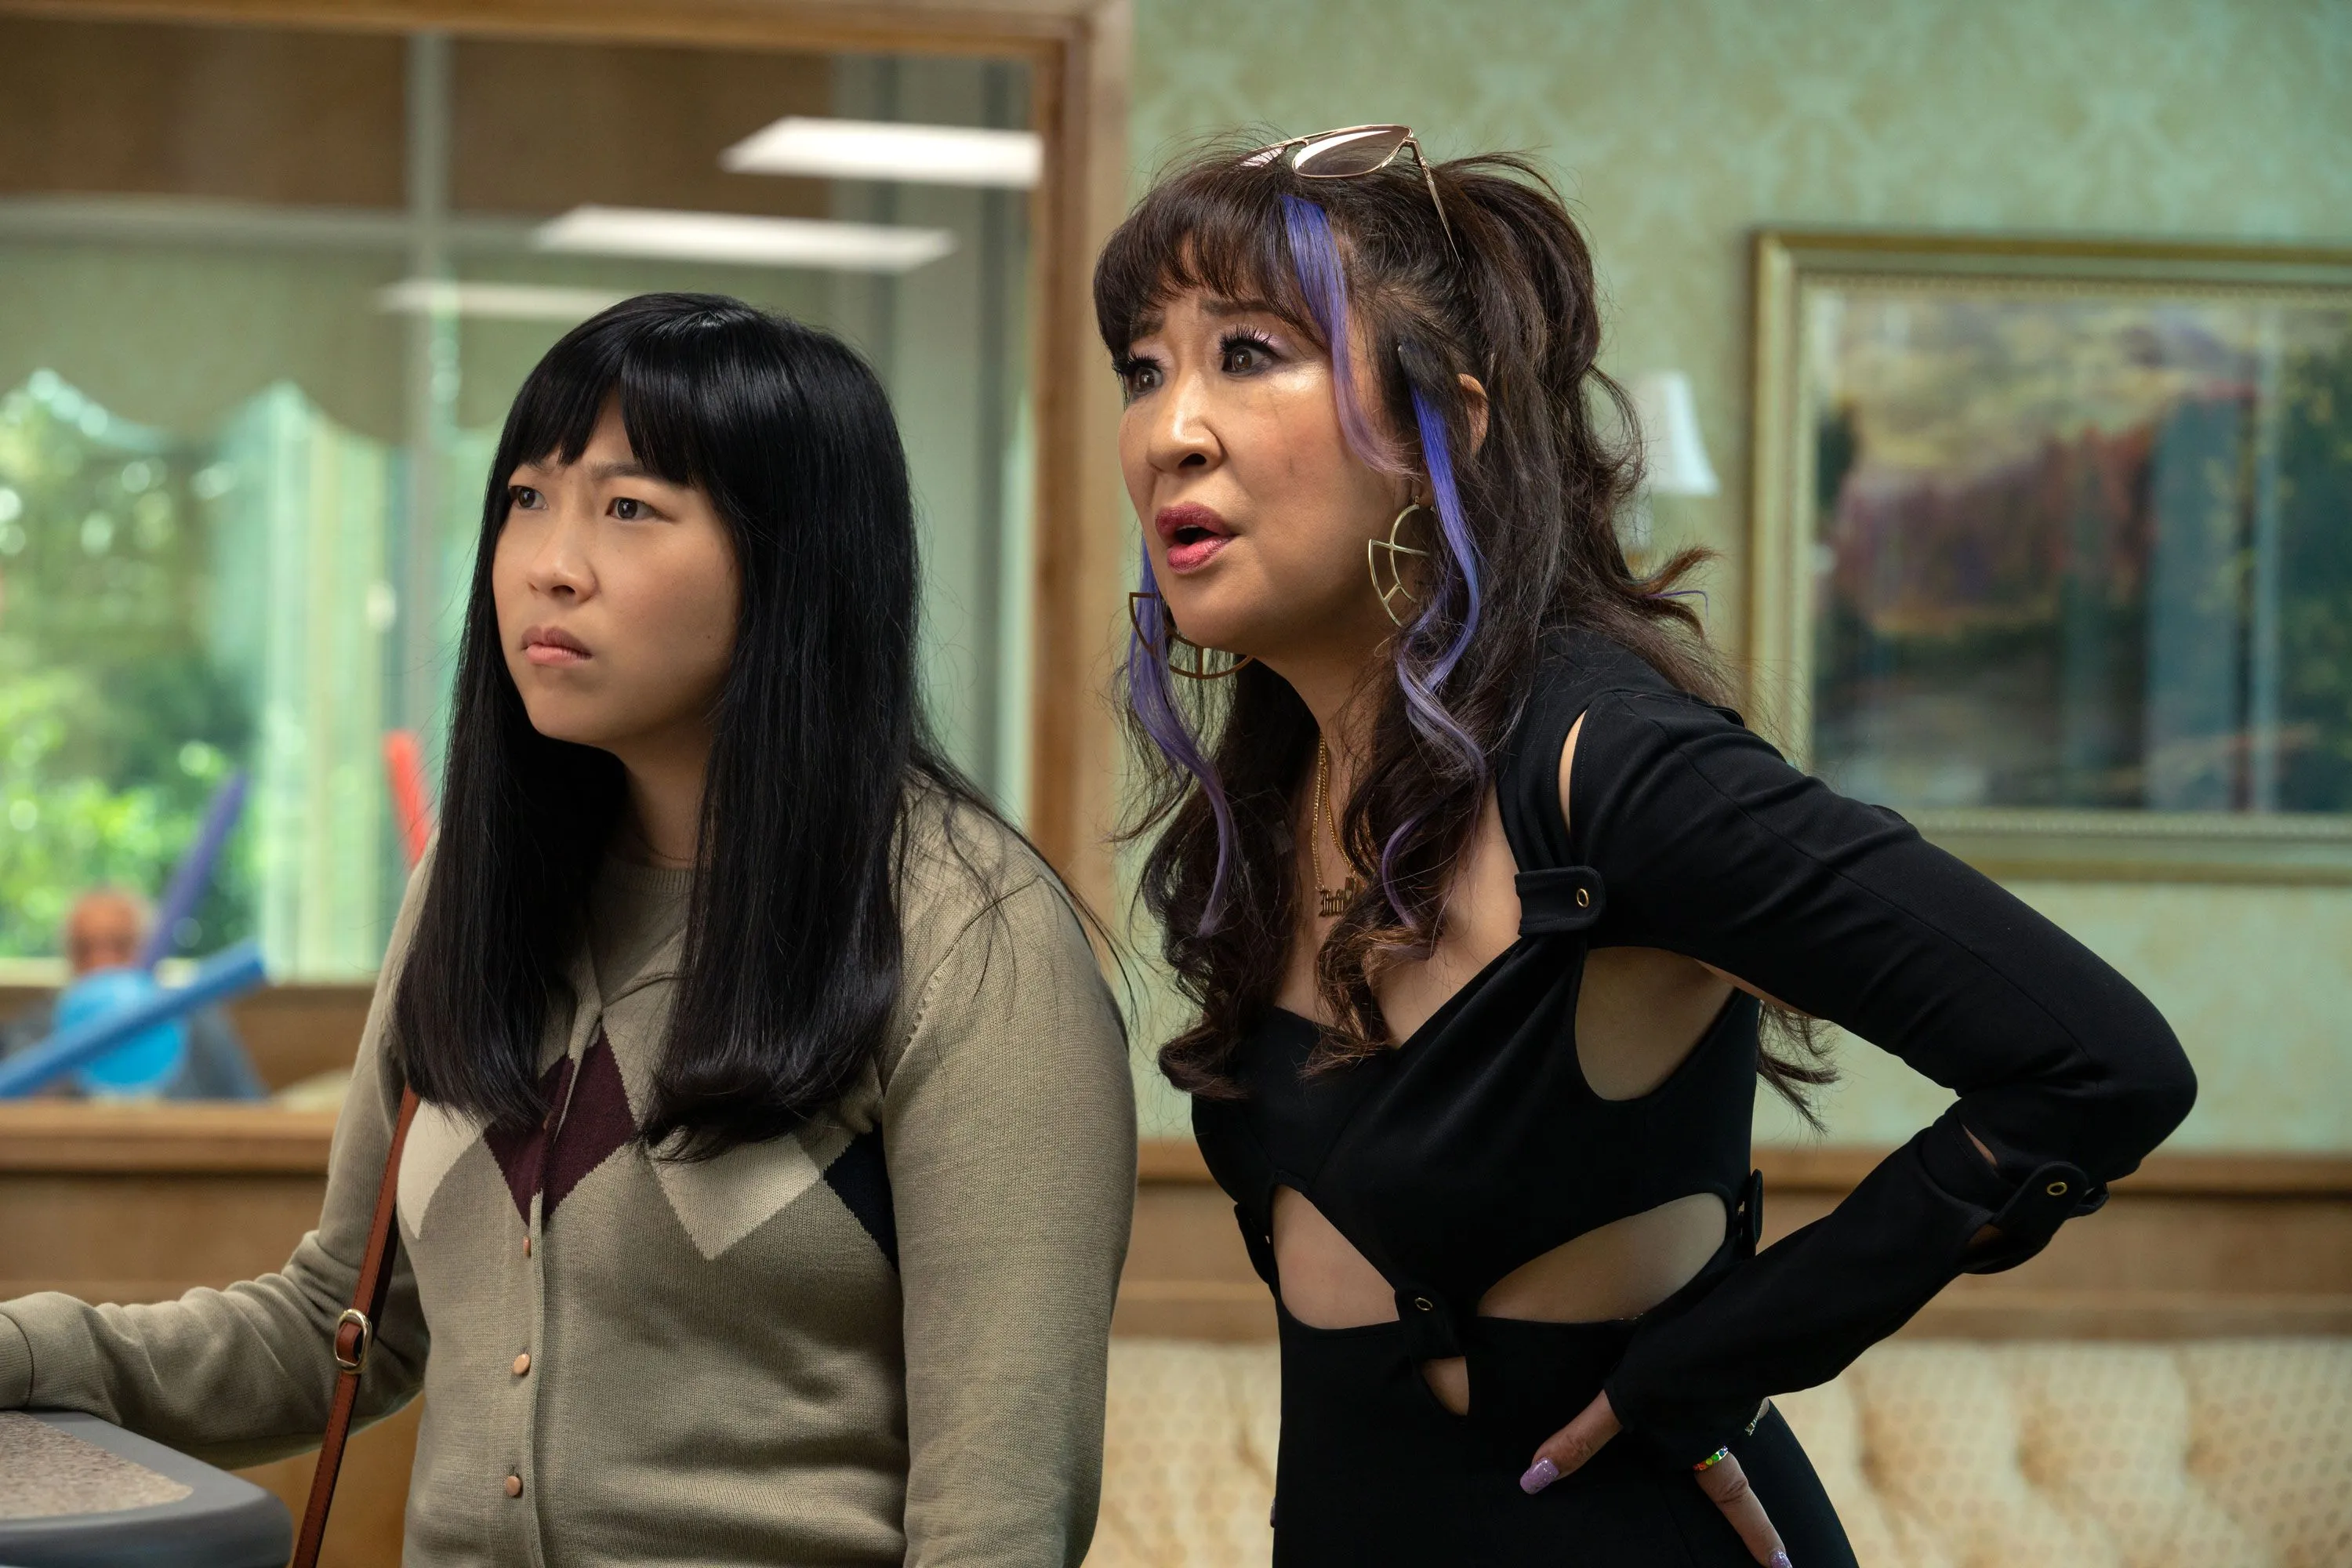 Quiz Lady Poster Revealed for Awkwafina Comedy Movie